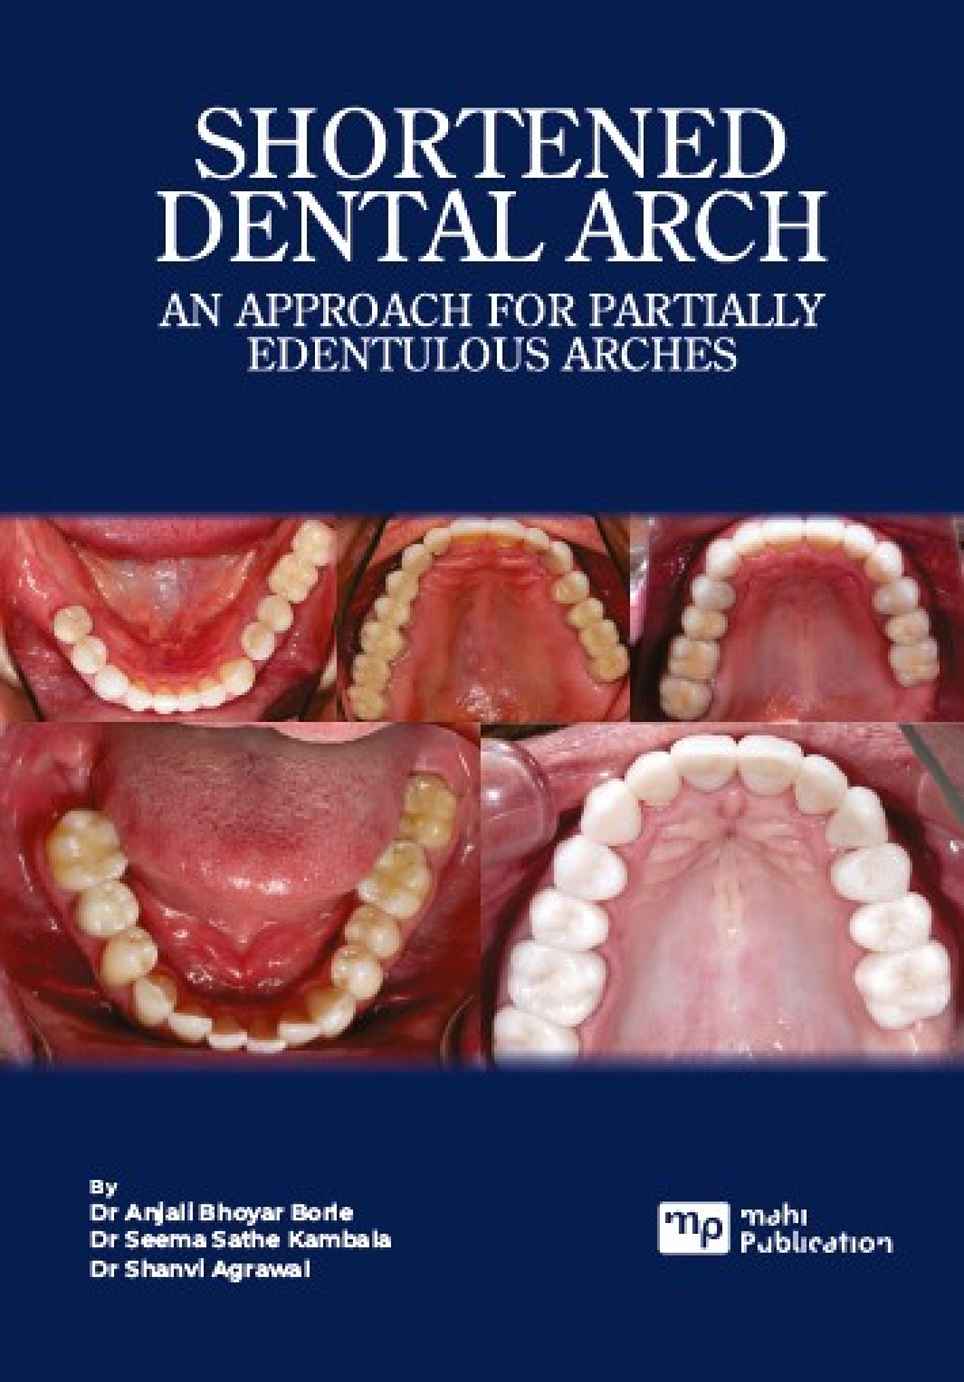 Shortened Dental Arch an Approach for Partially Edentulous Arches